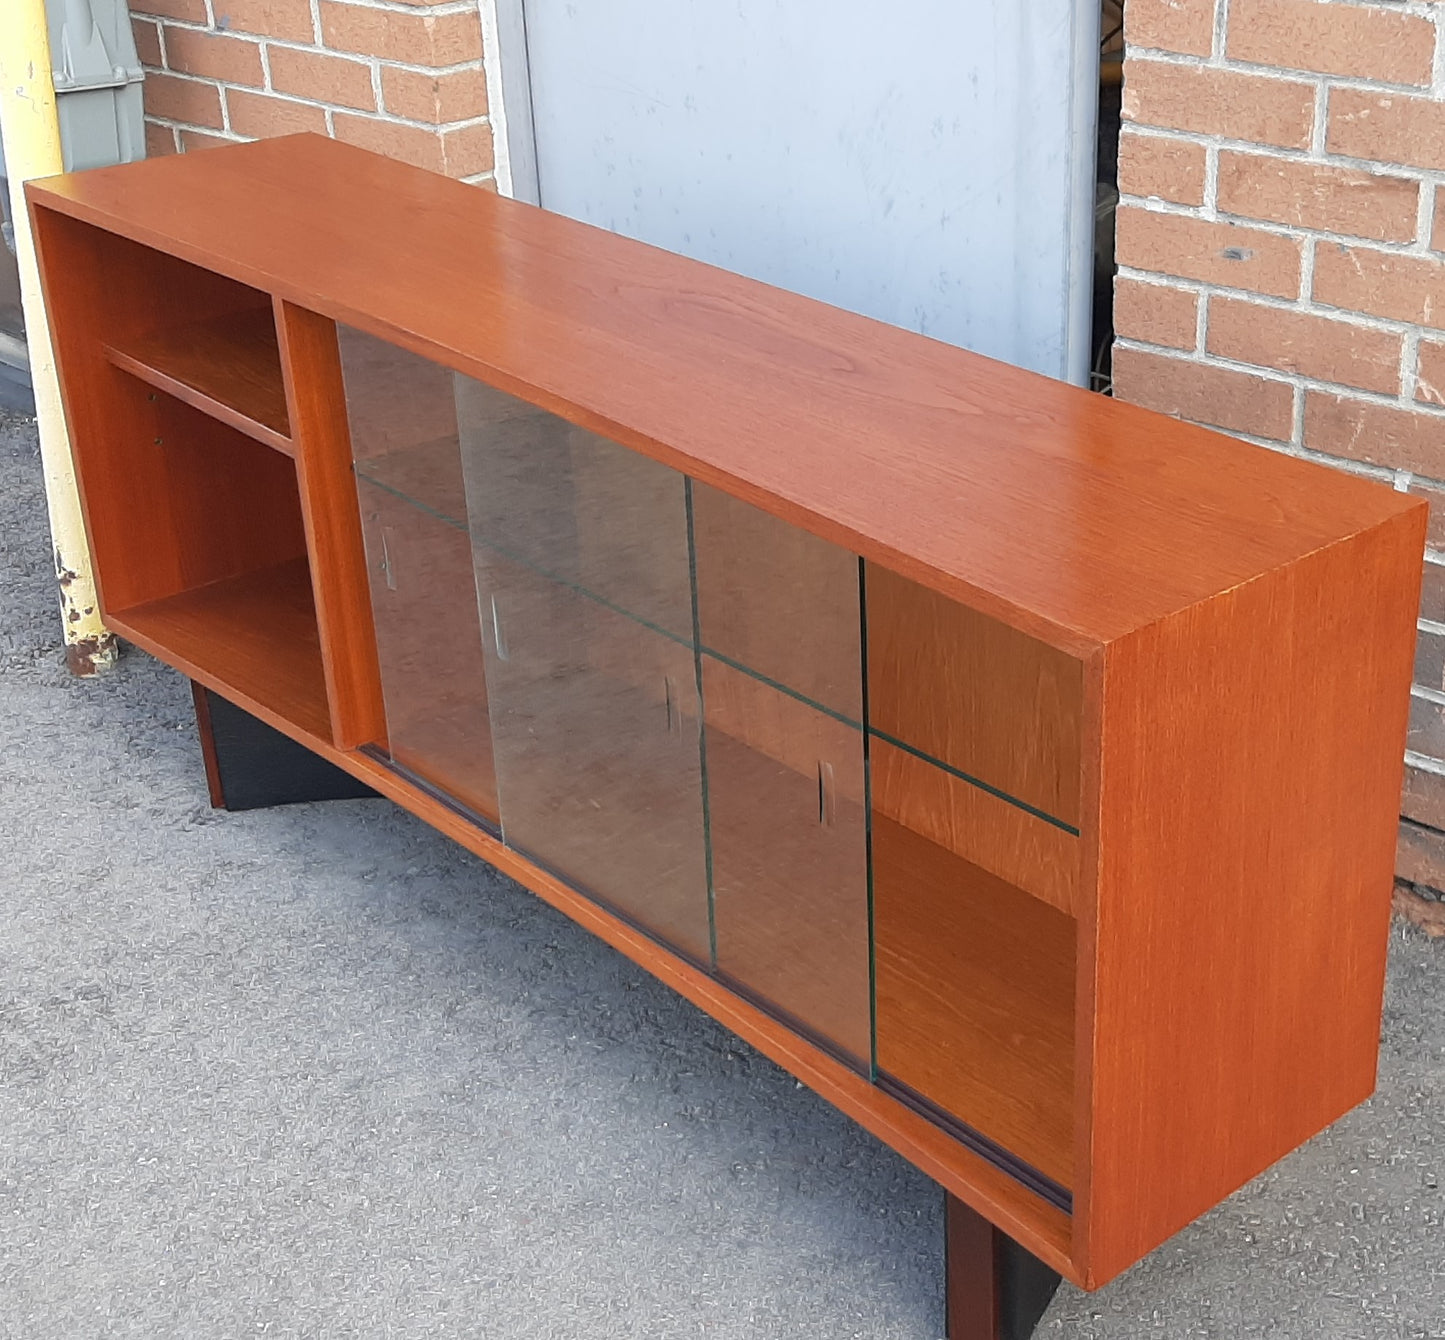 REFINISHED MCM  Teak Console 60" w glass doors, Perfect